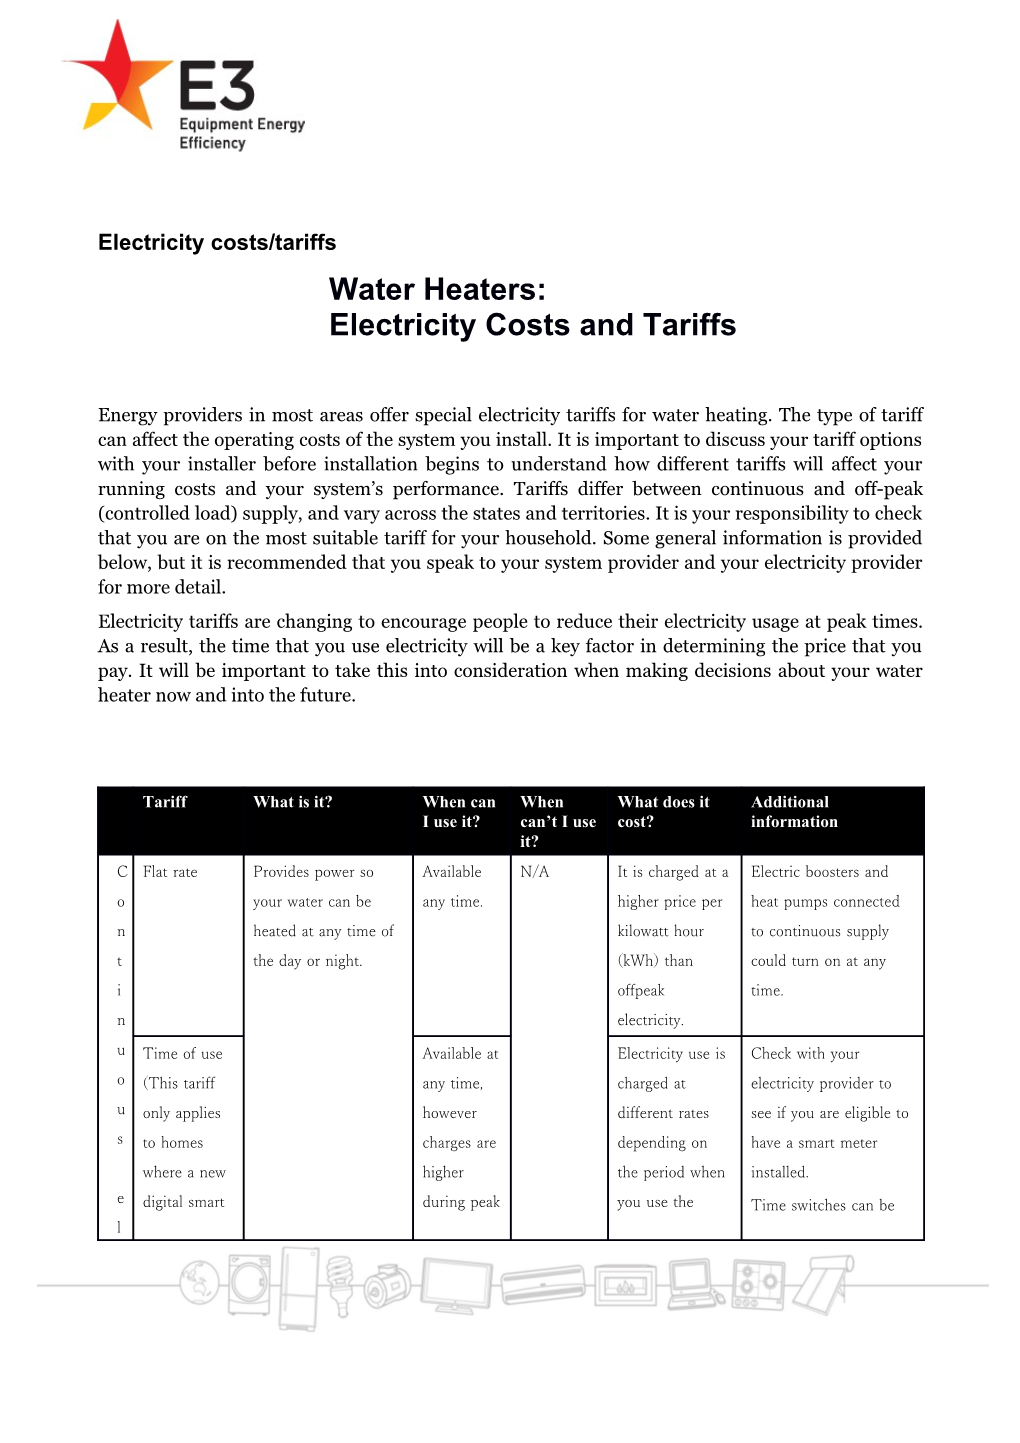 Water Heaters: Electricity Costs and Tariffs